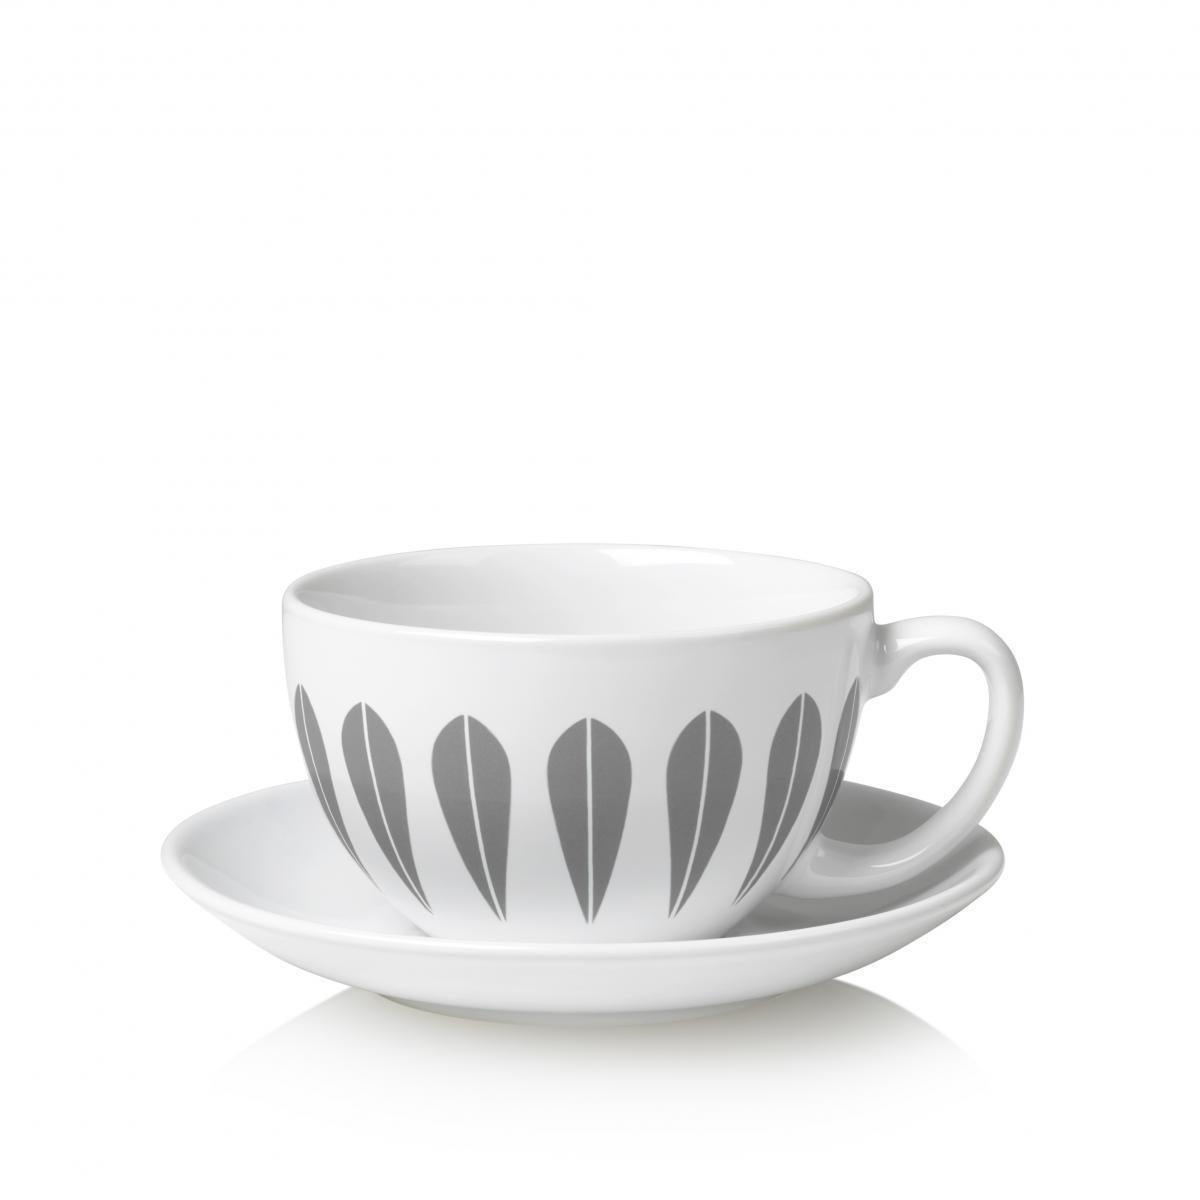 Lucie Kaas Arne Clausen Collection Cups W. Saucer Gray, 10cm